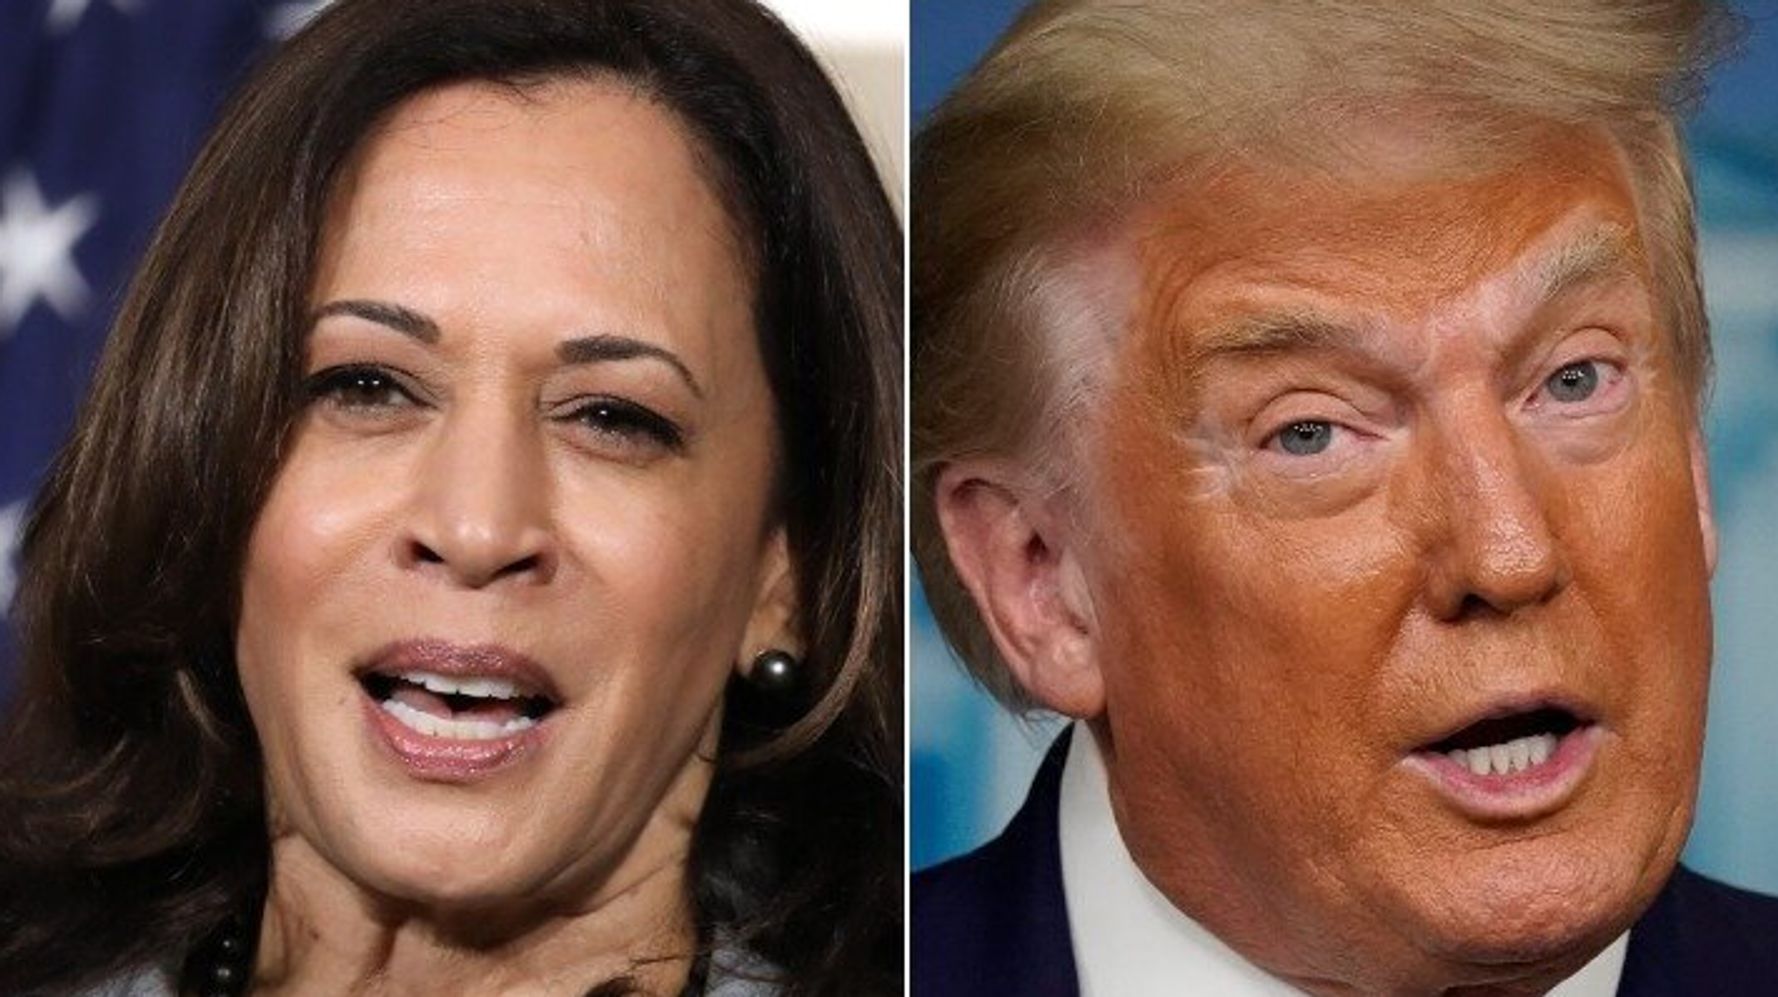 DANCE OFF!: Kamala Harris And Trump Bust Out Competing Moves At Dueling Rallies